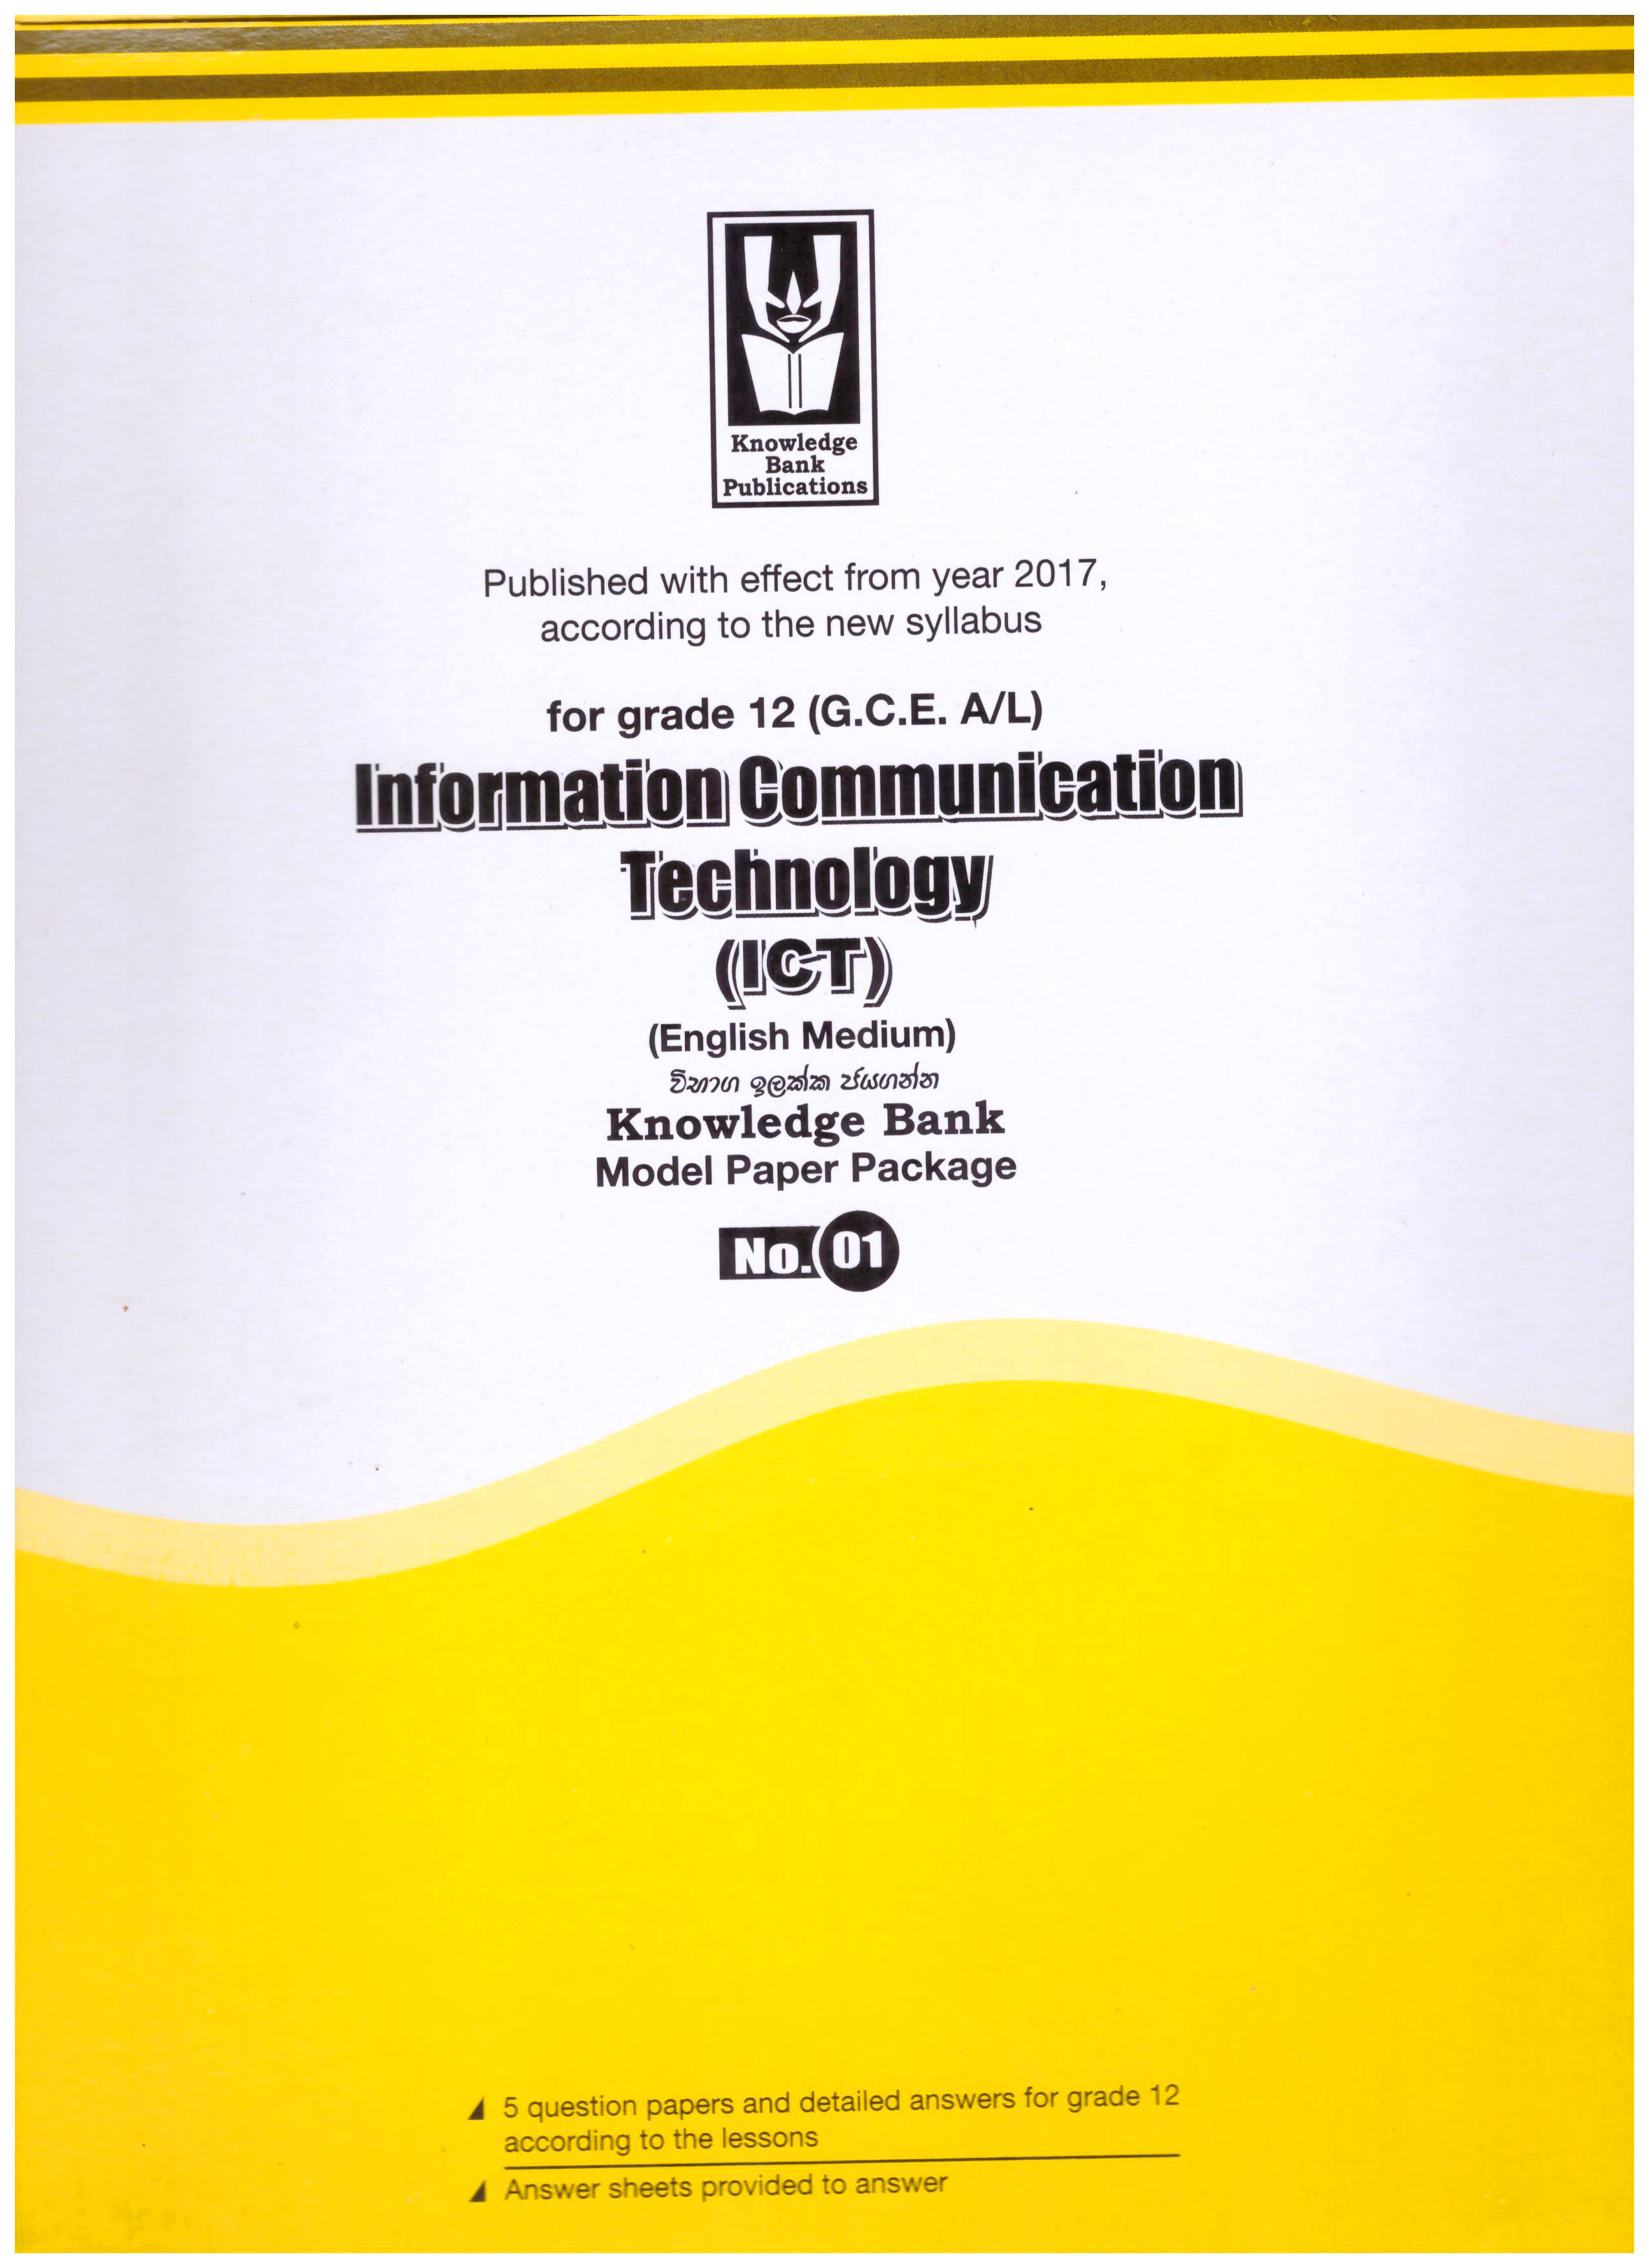 Knowledge Bank A/L Information Communication Technology No.1 (For Grade 12) Model Paper Package 